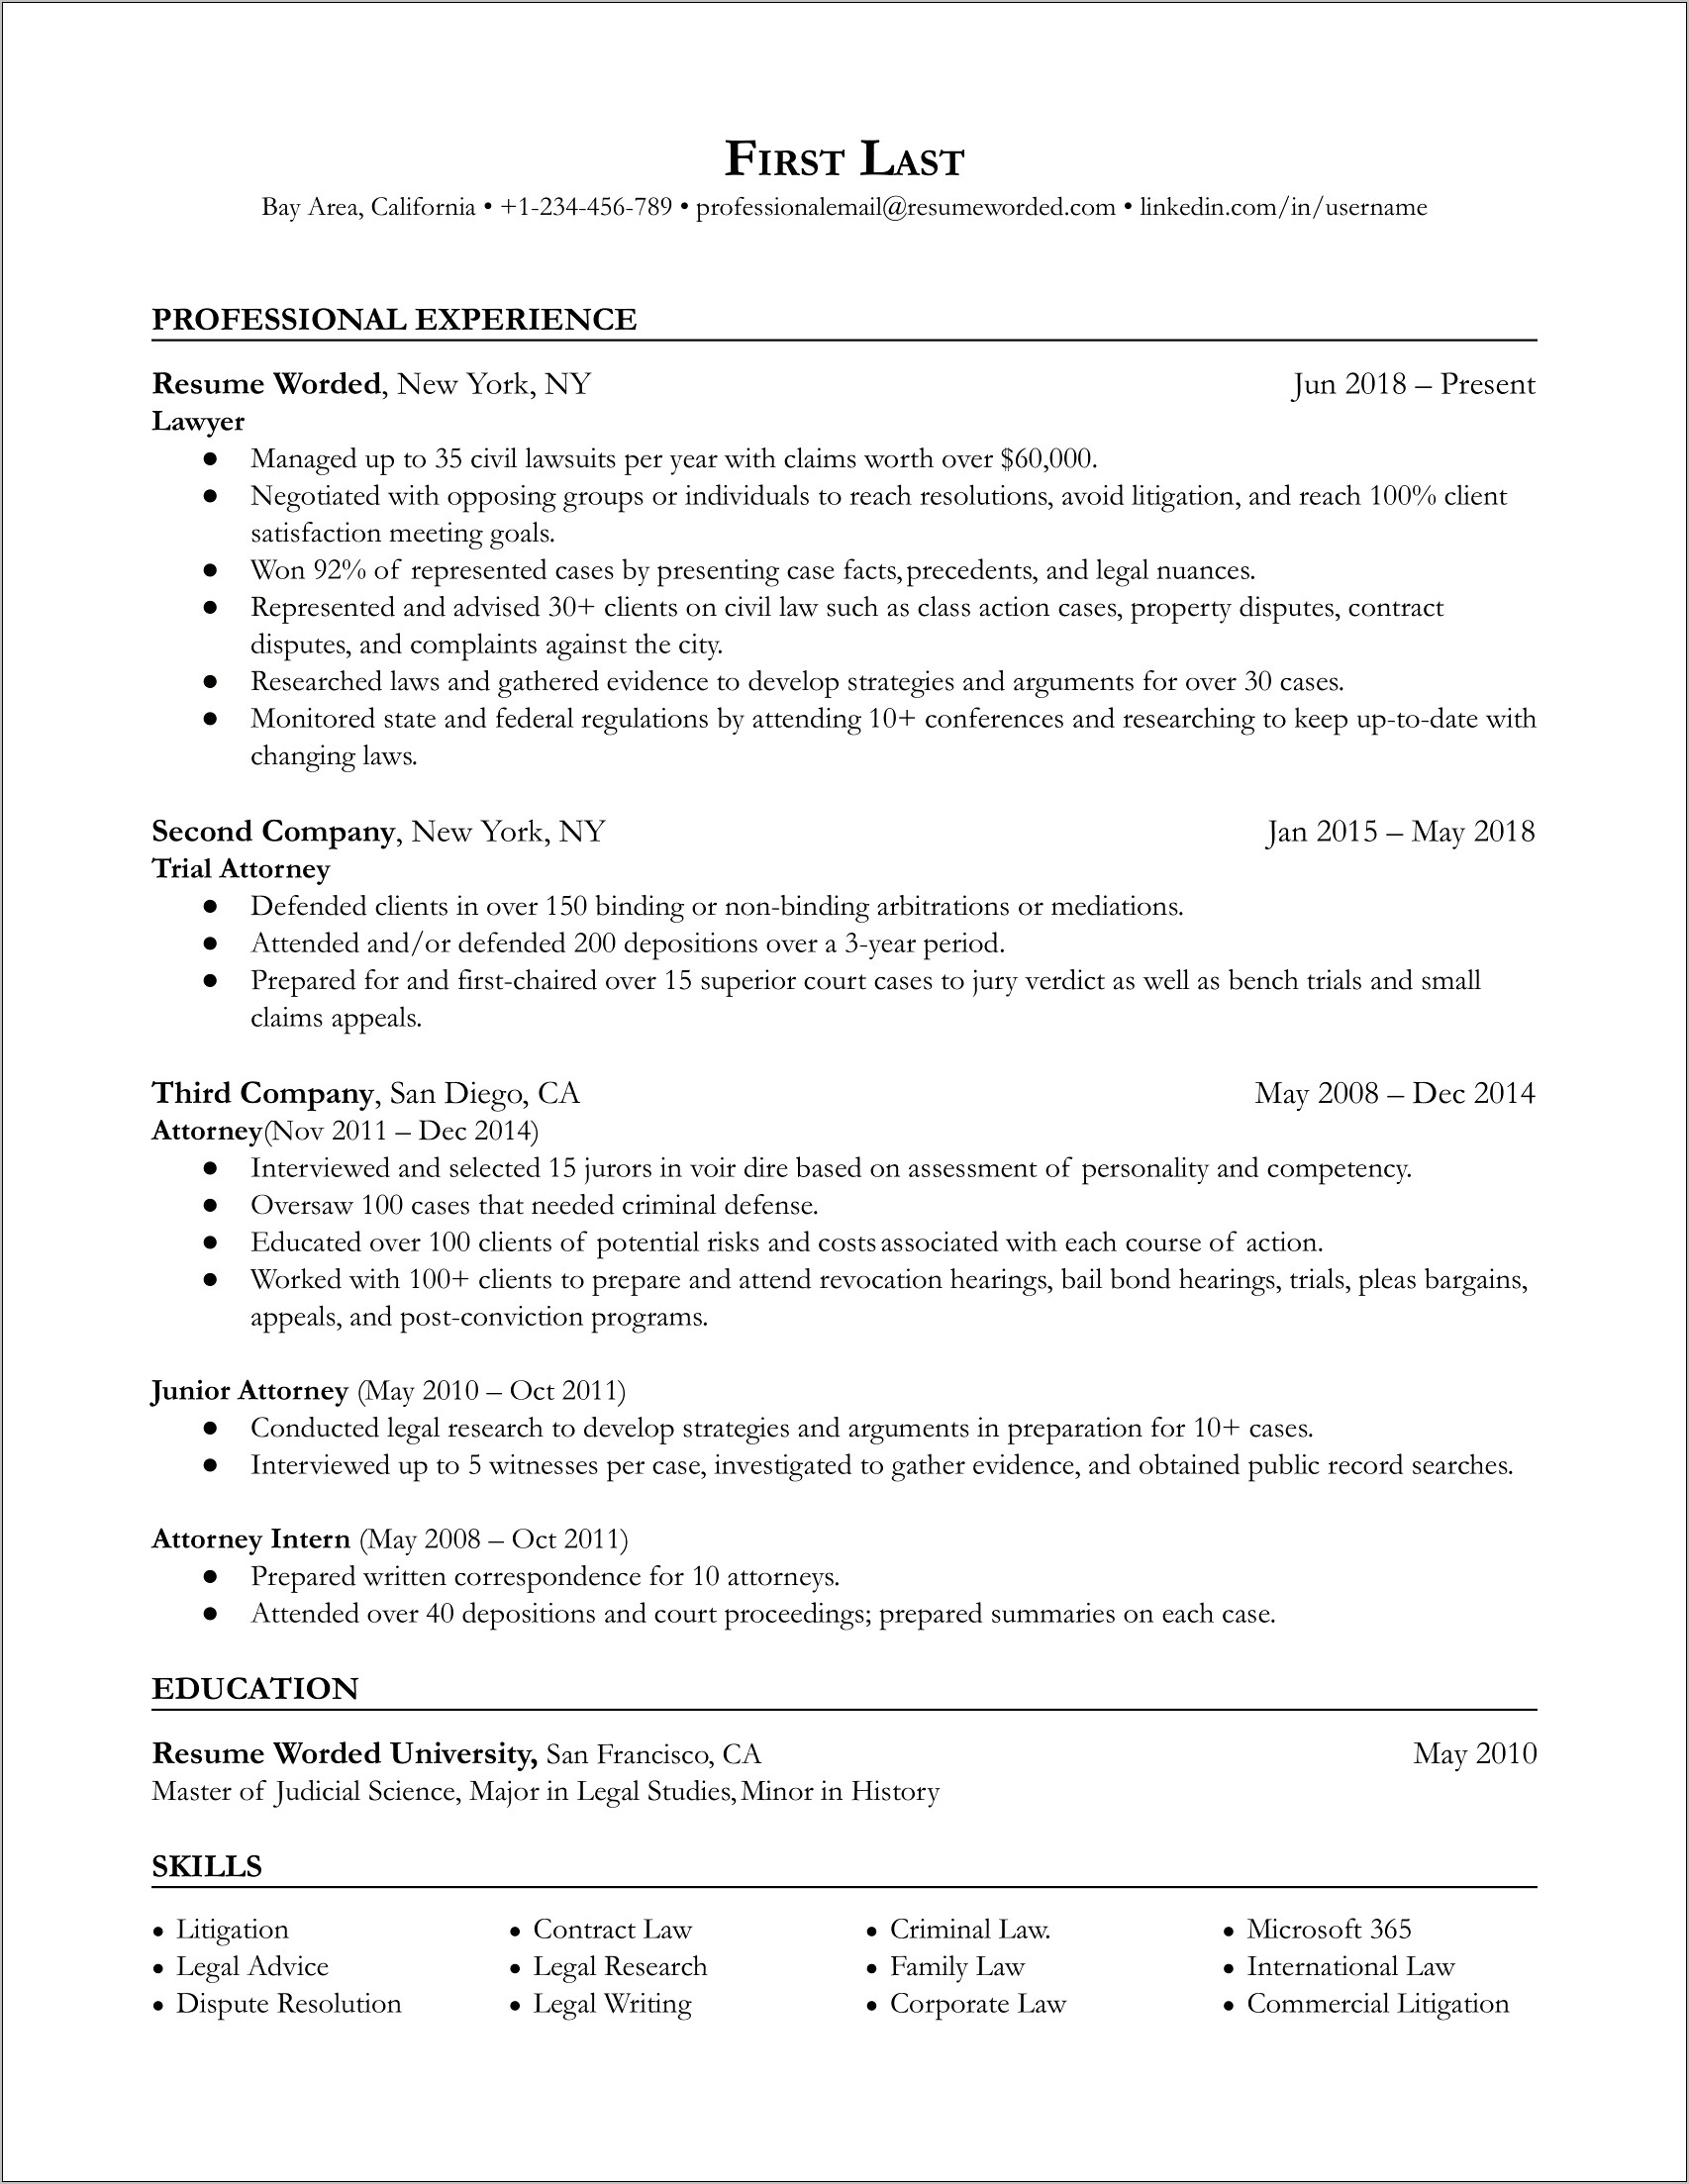 Resume Objective For A Lawyer